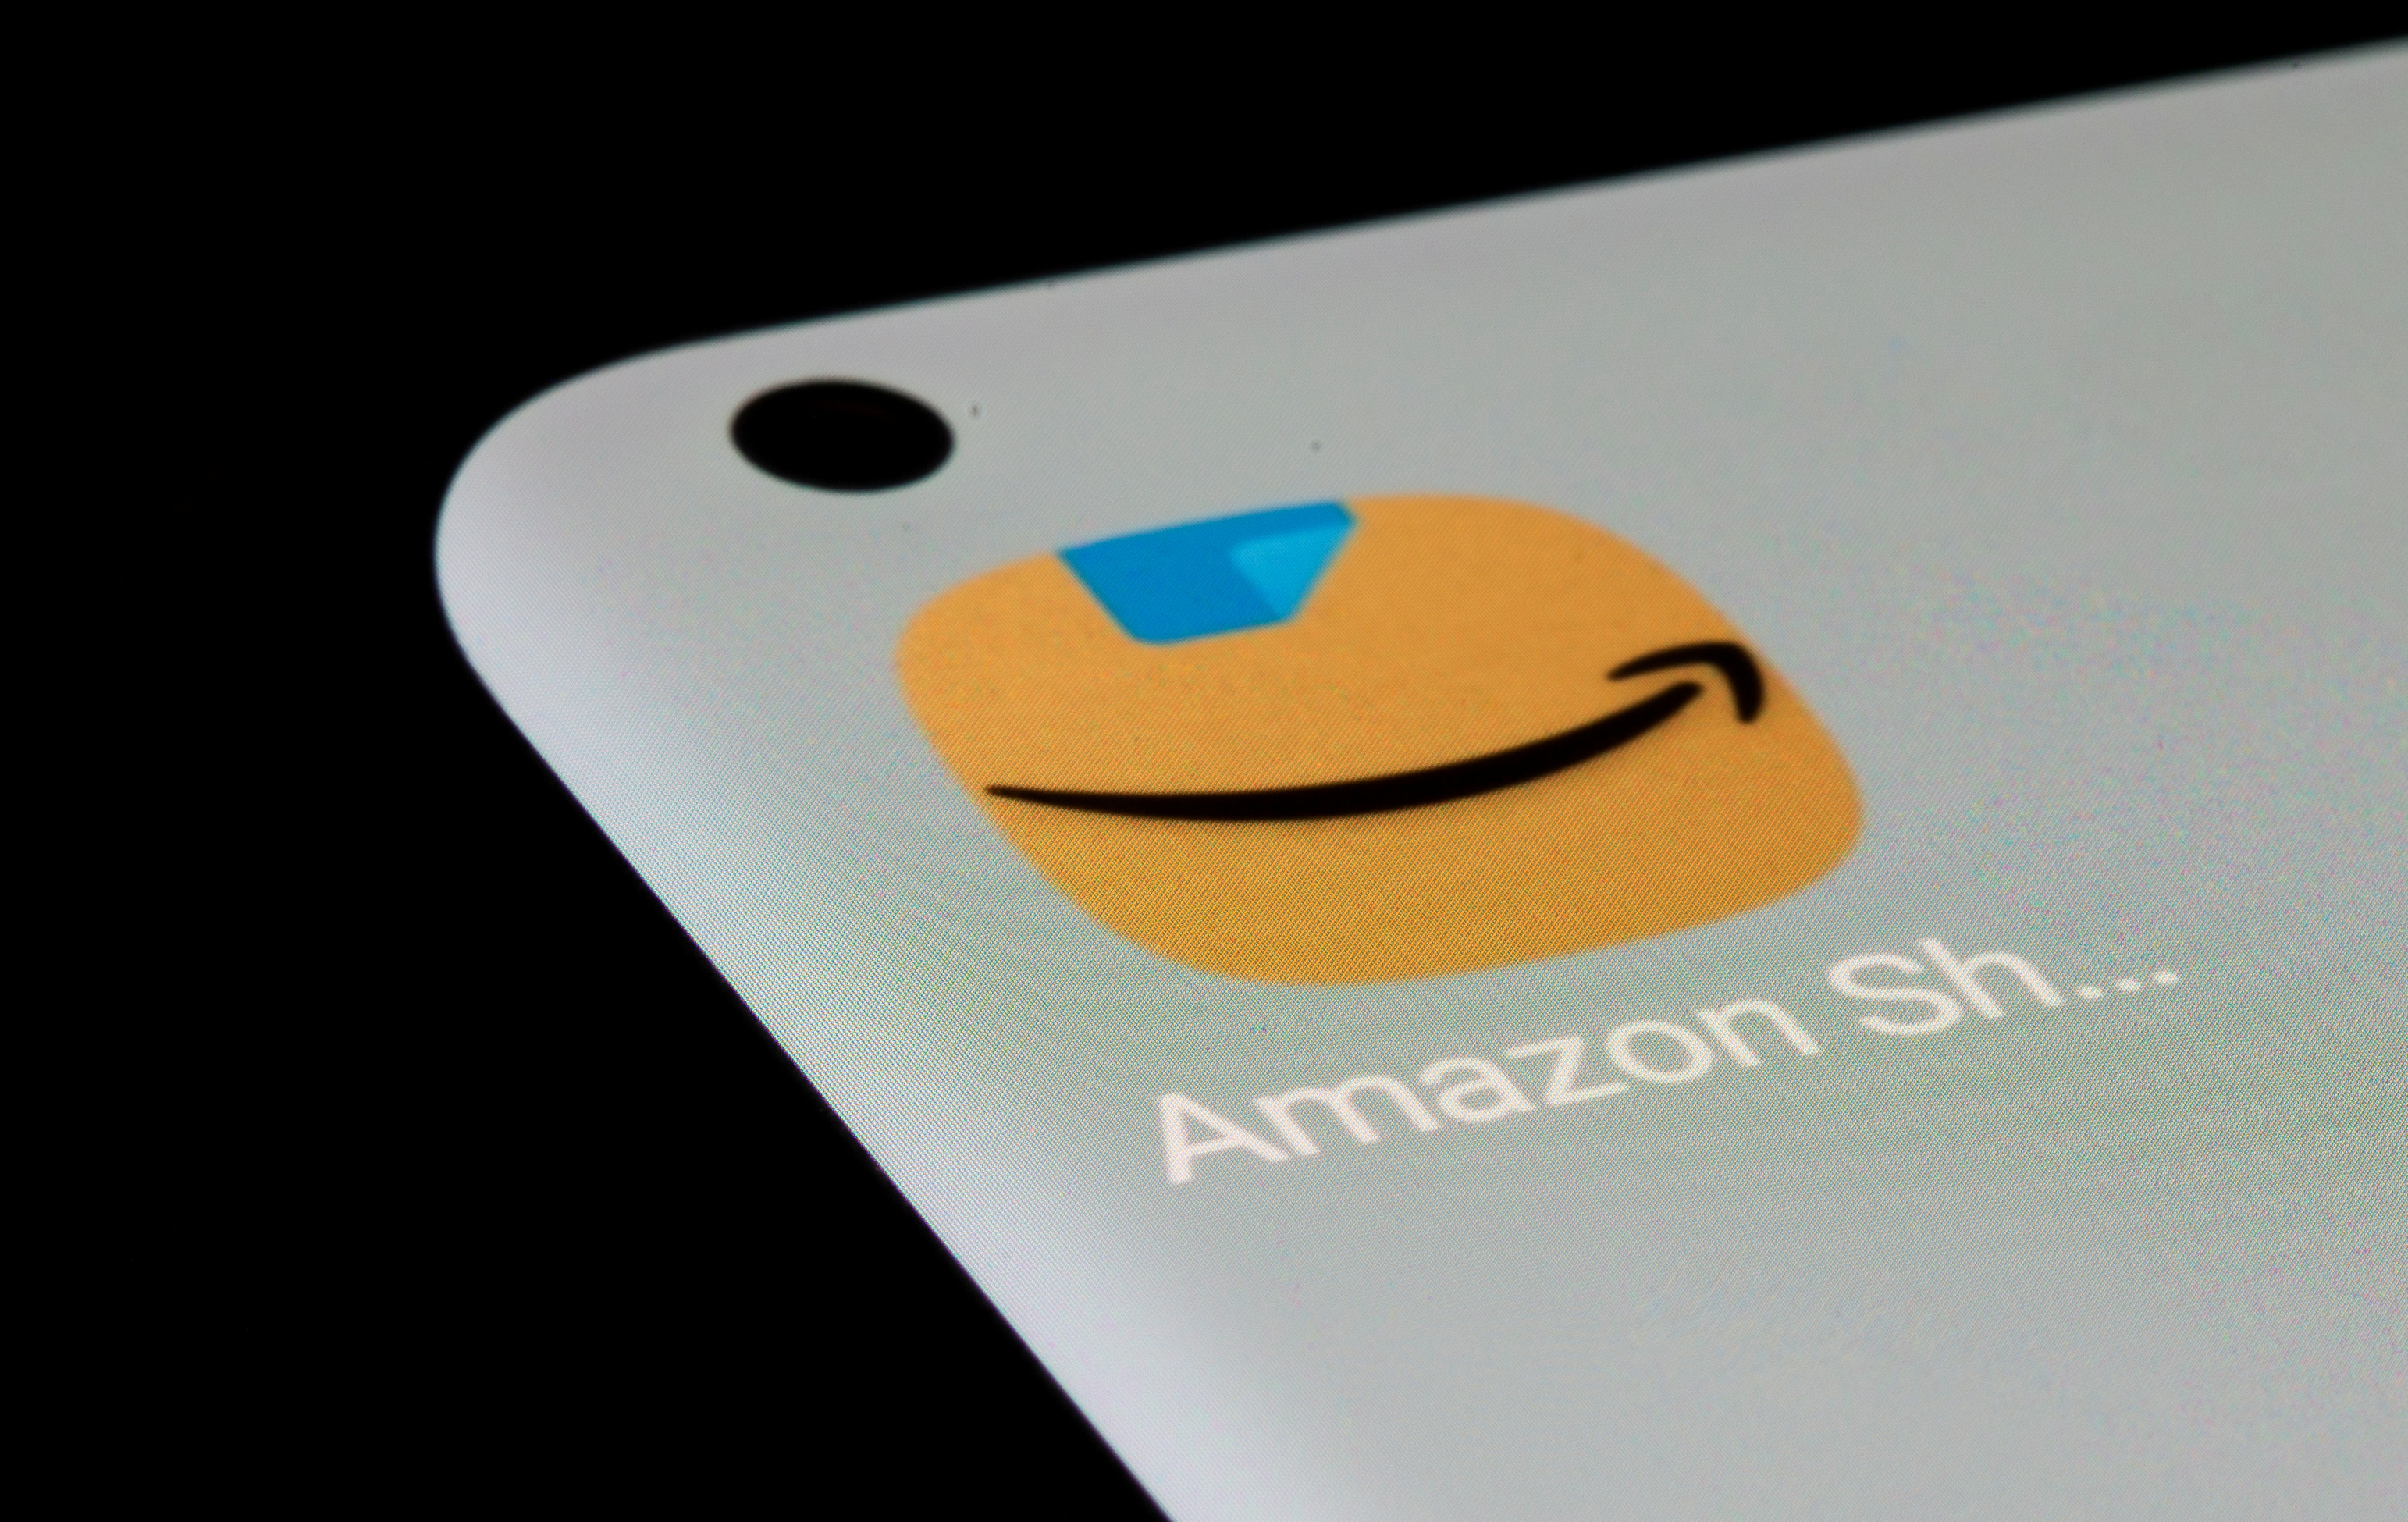 Amazon app is seen on a smartphone in this illustration